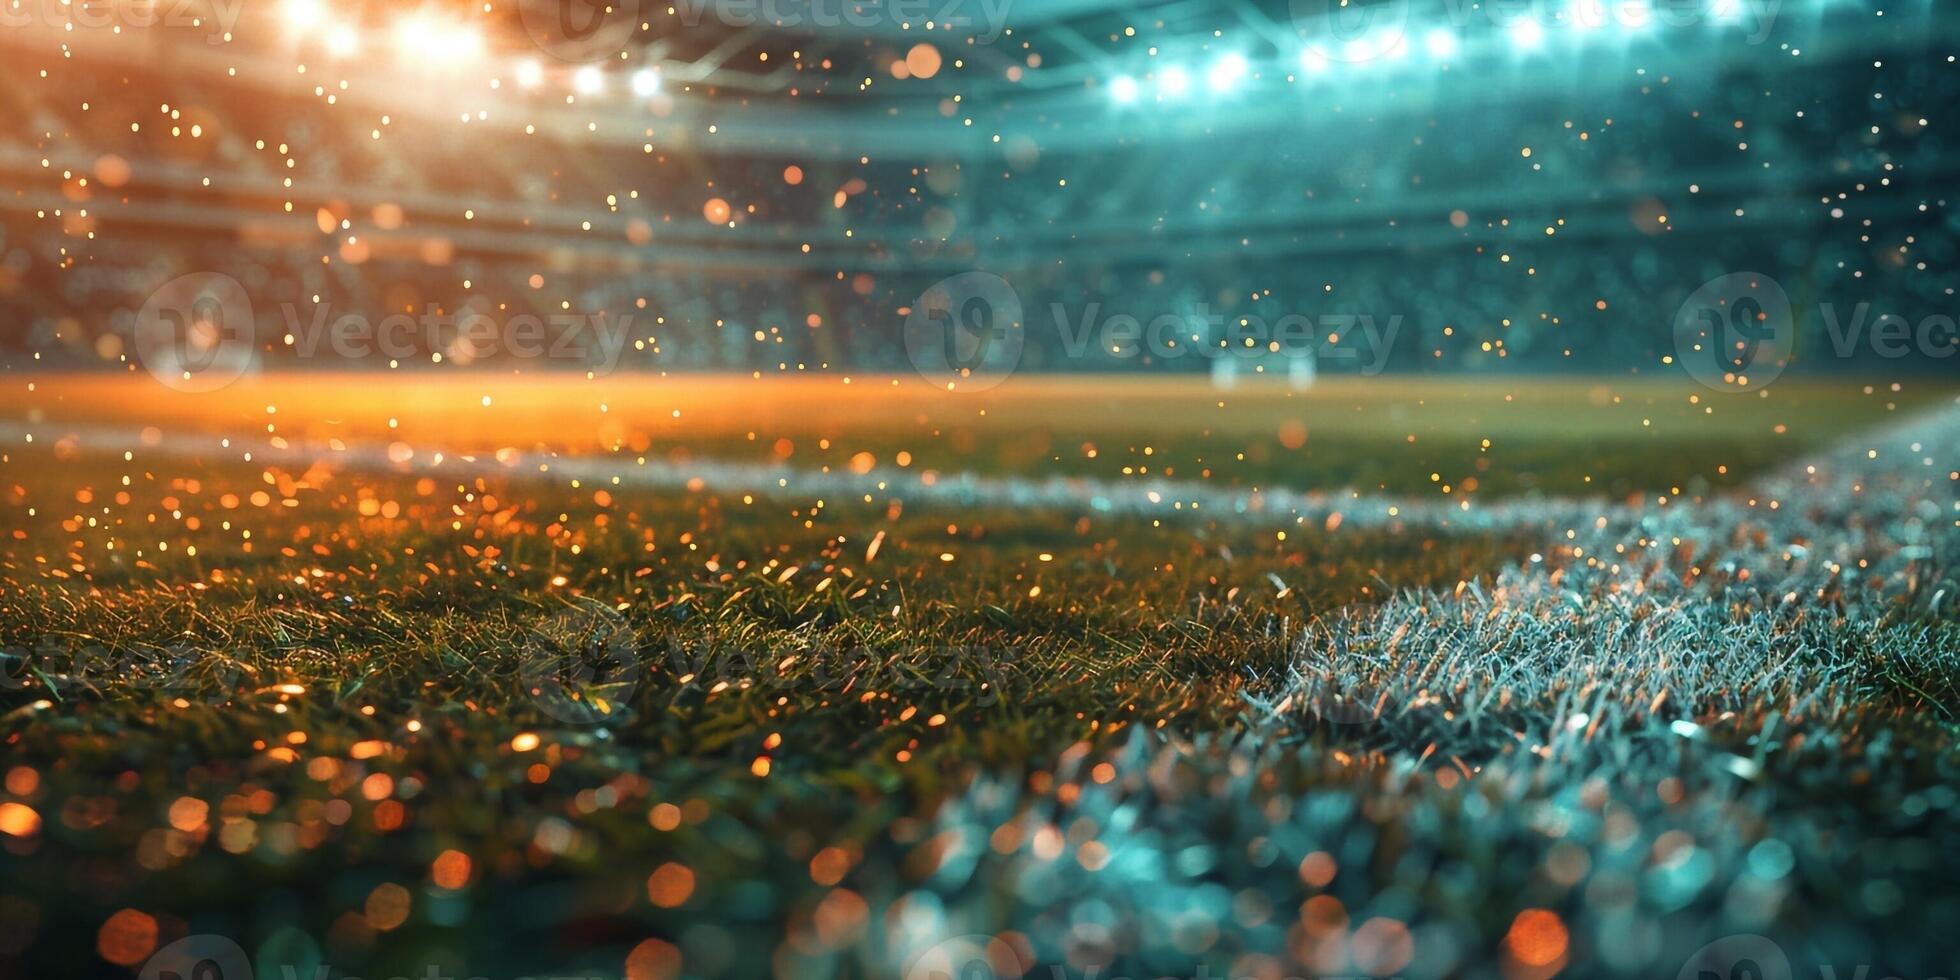 AI Generated On the stadium. abstract football or soccer backgrounds photo